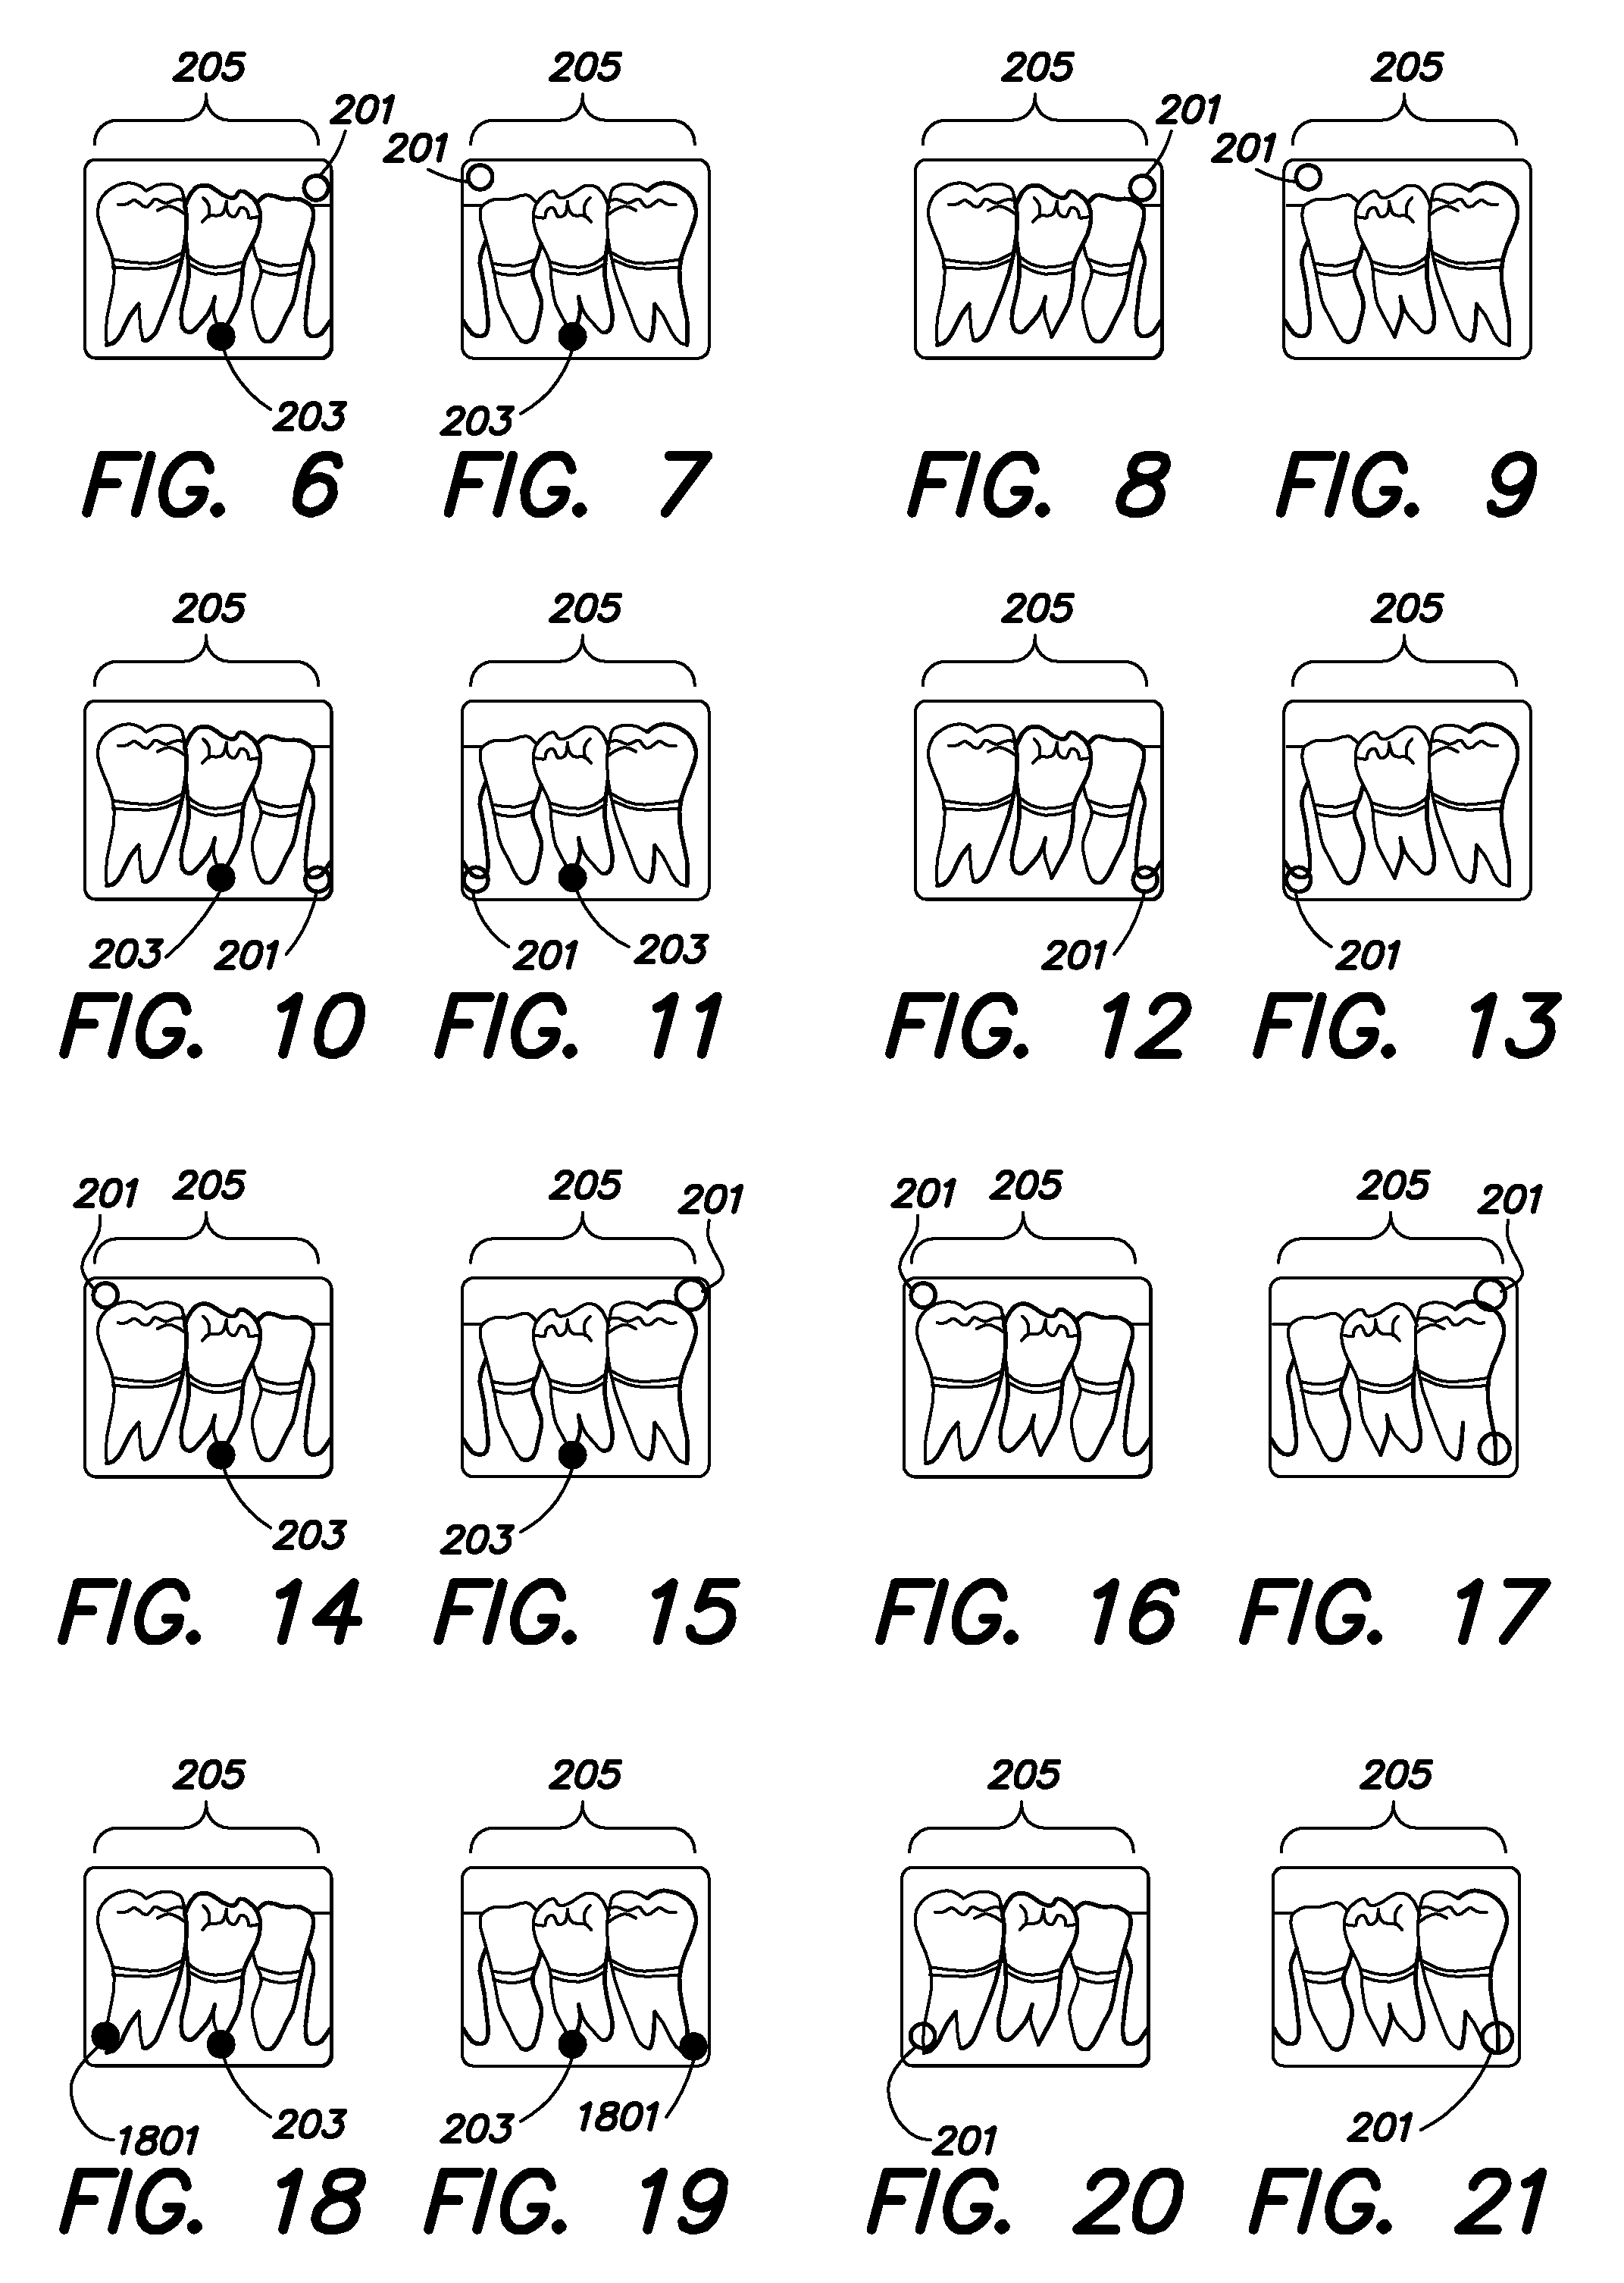 Methods and apparatus for preserving orientation information in radiography images